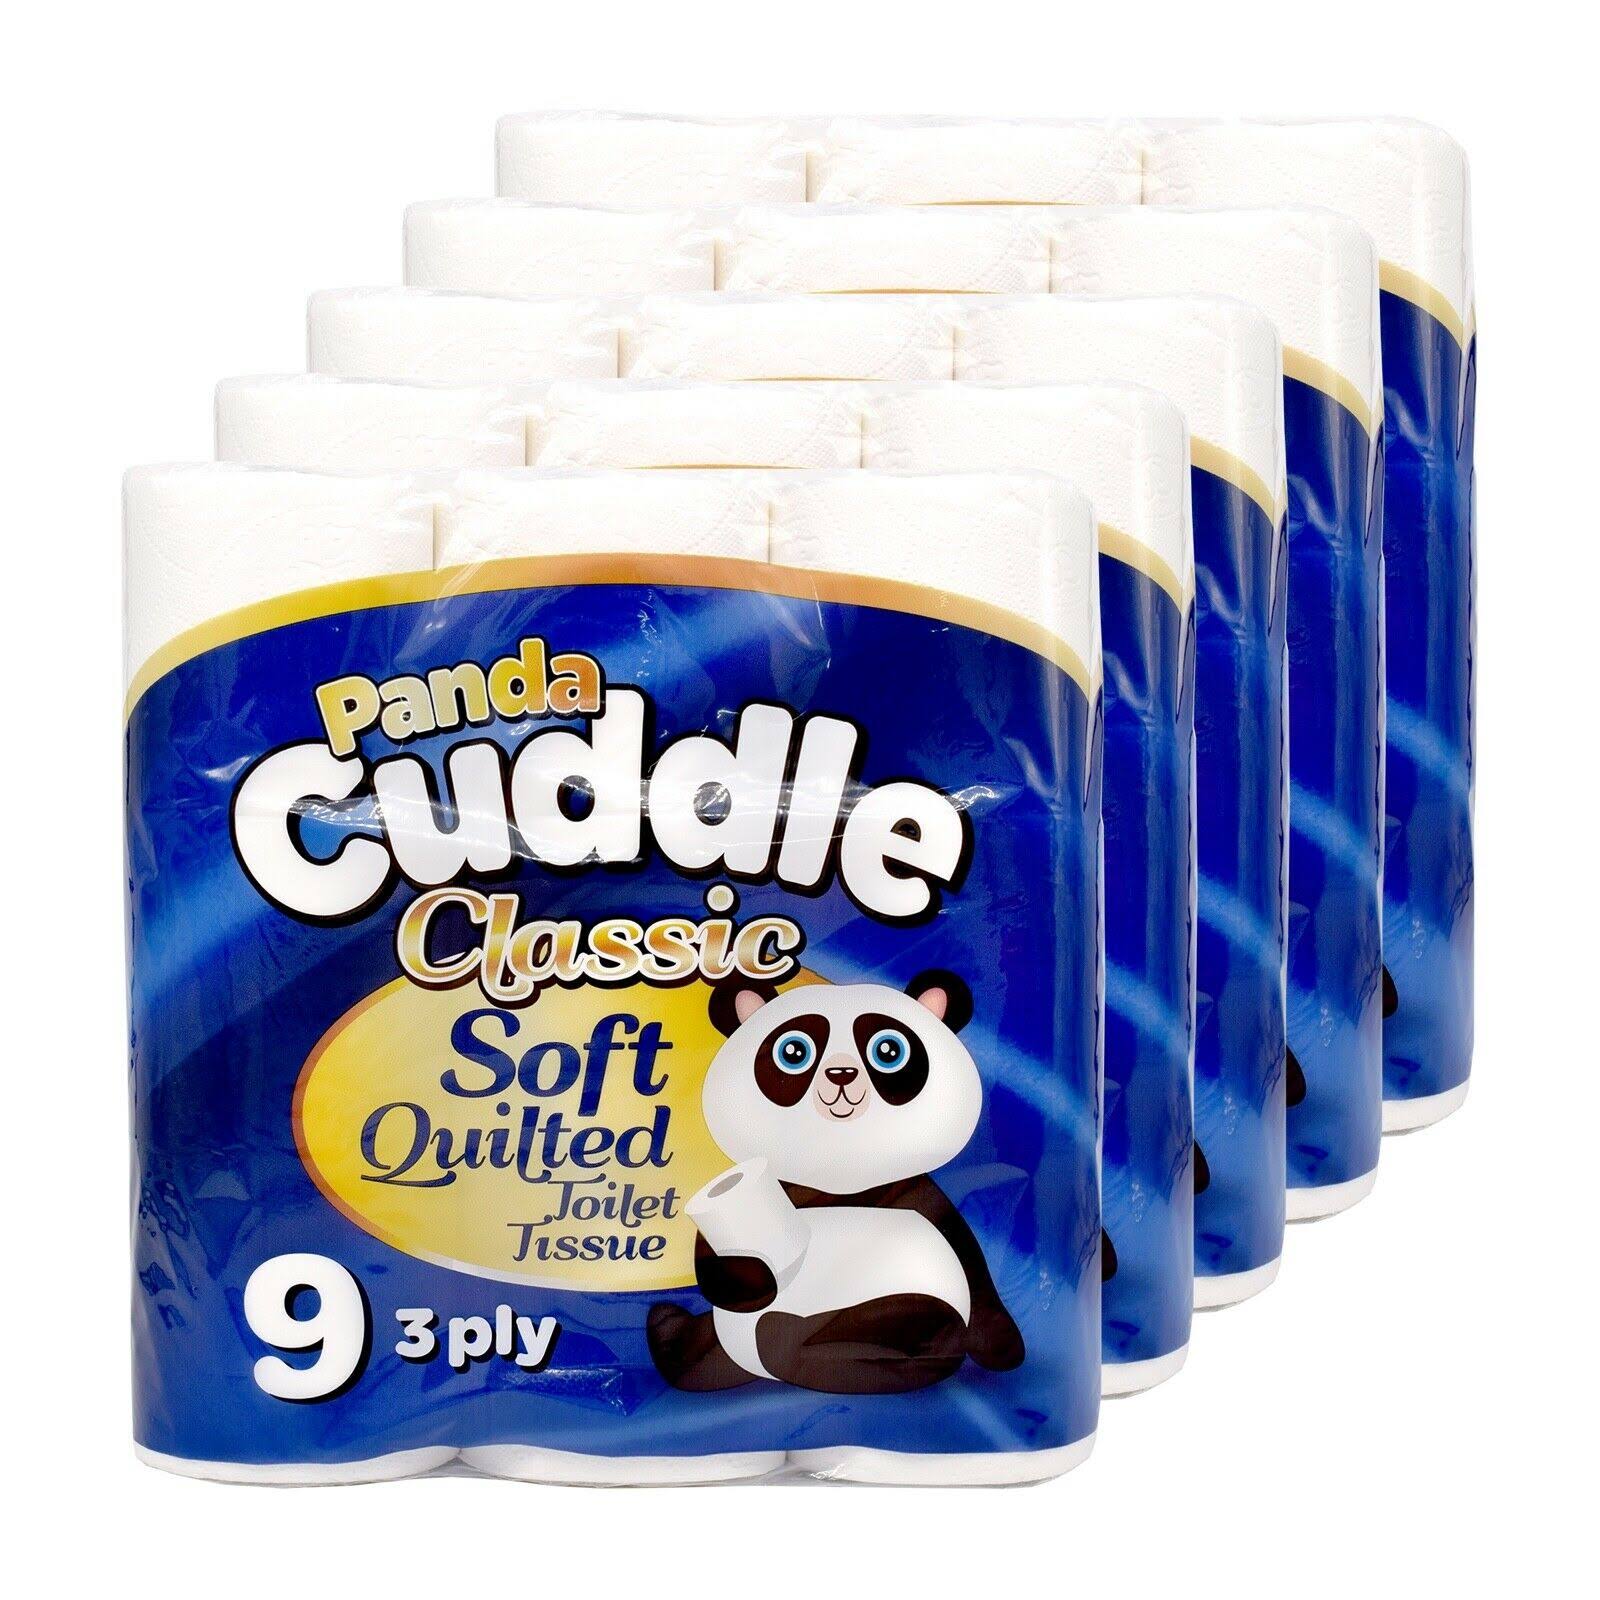 Panda Cuddle Classic 3 Ply Soft Quilted Toilet Paper - 45 Rolls